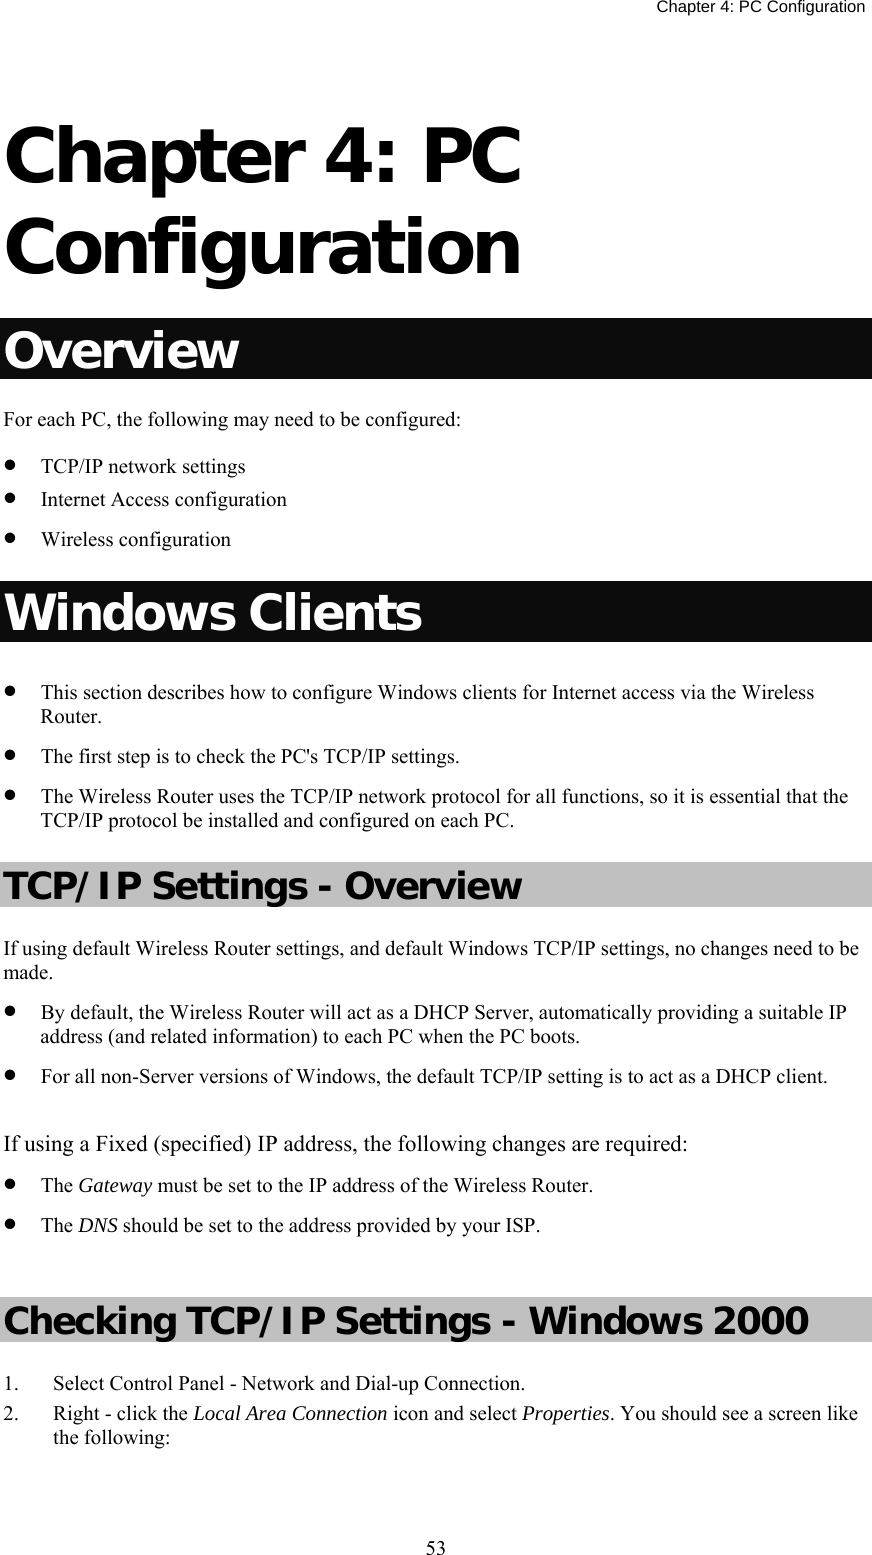   Chapter 4: PC Configuration  53 Chapter 4: PC Configuration Overview For each PC, the following may need to be configured: • TCP/IP network settings • Internet Access configuration • Wireless configuration Windows Clients • This section describes how to configure Windows clients for Internet access via the Wireless Router. • The first step is to check the PC&apos;s TCP/IP settings.  • The Wireless Router uses the TCP/IP network protocol for all functions, so it is essential that the TCP/IP protocol be installed and configured on each PC. TCP/IP Settings - Overview If using default Wireless Router settings, and default Windows TCP/IP settings, no changes need to be made. • By default, the Wireless Router will act as a DHCP Server, automatically providing a suitable IP address (and related information) to each PC when the PC boots. • For all non-Server versions of Windows, the default TCP/IP setting is to act as a DHCP client.  If using a Fixed (specified) IP address, the following changes are required: • The Gateway must be set to the IP address of the Wireless Router. • The DNS should be set to the address provided by your ISP.  Checking TCP/IP Settings - Windows 2000 1. Select Control Panel - Network and Dial-up Connection. 2. Right - click the Local Area Connection icon and select Properties. You should see a screen like the following: 